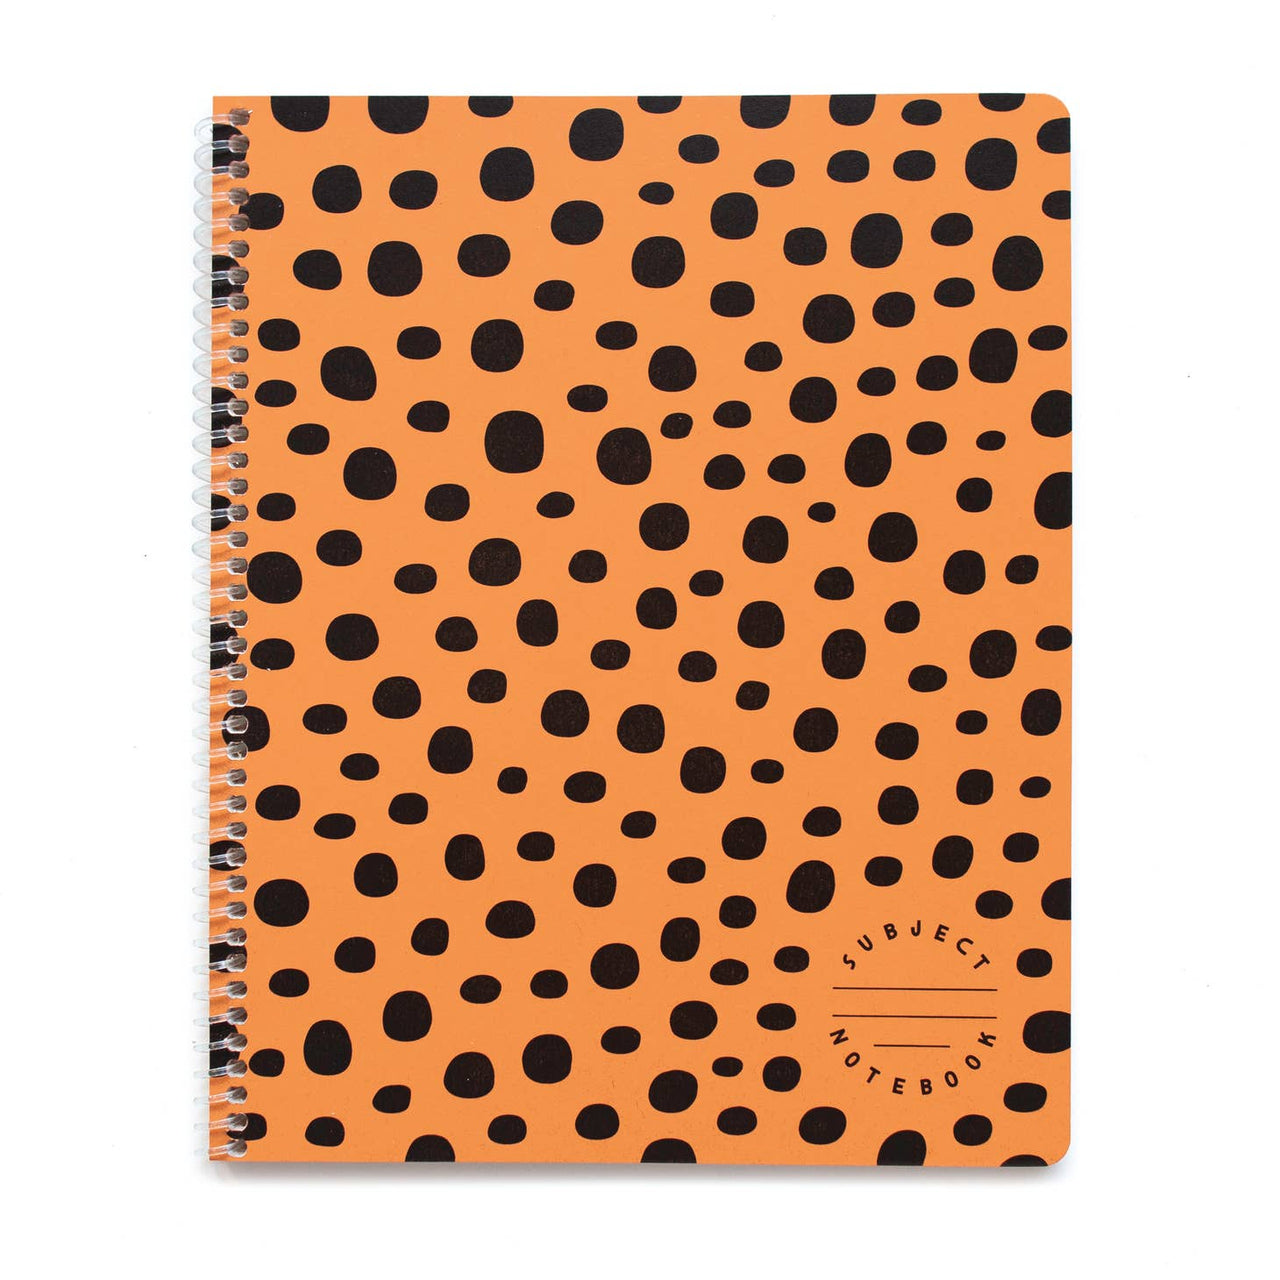 Worthwhile - Spots Subject Notebook